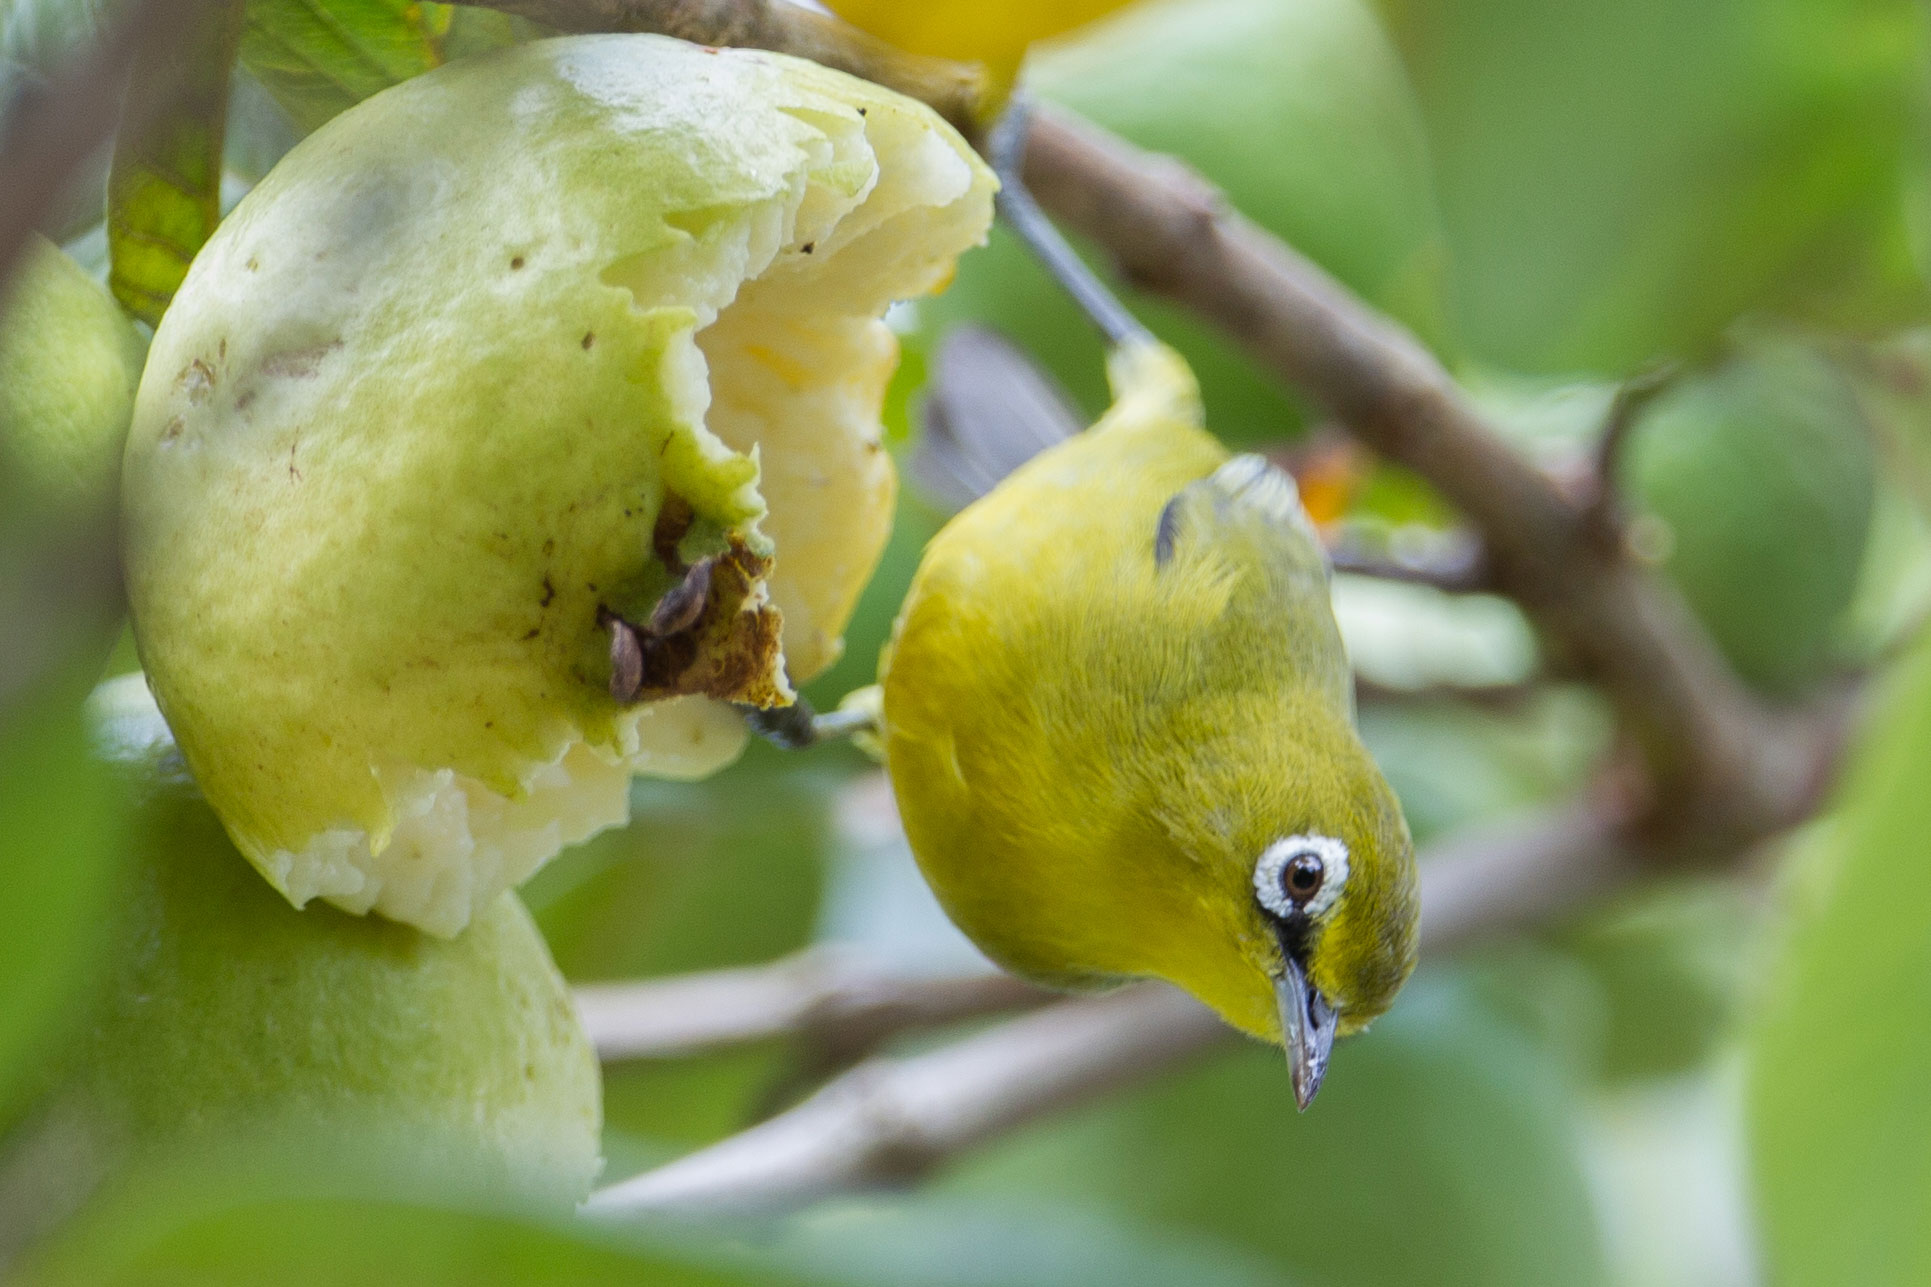 A lemon-bellied white-eye perched on a half-eaten fruit in a tree. The photo shows a small yellow bird with a small beak and a brown eye surrounded by a distinctive white region.